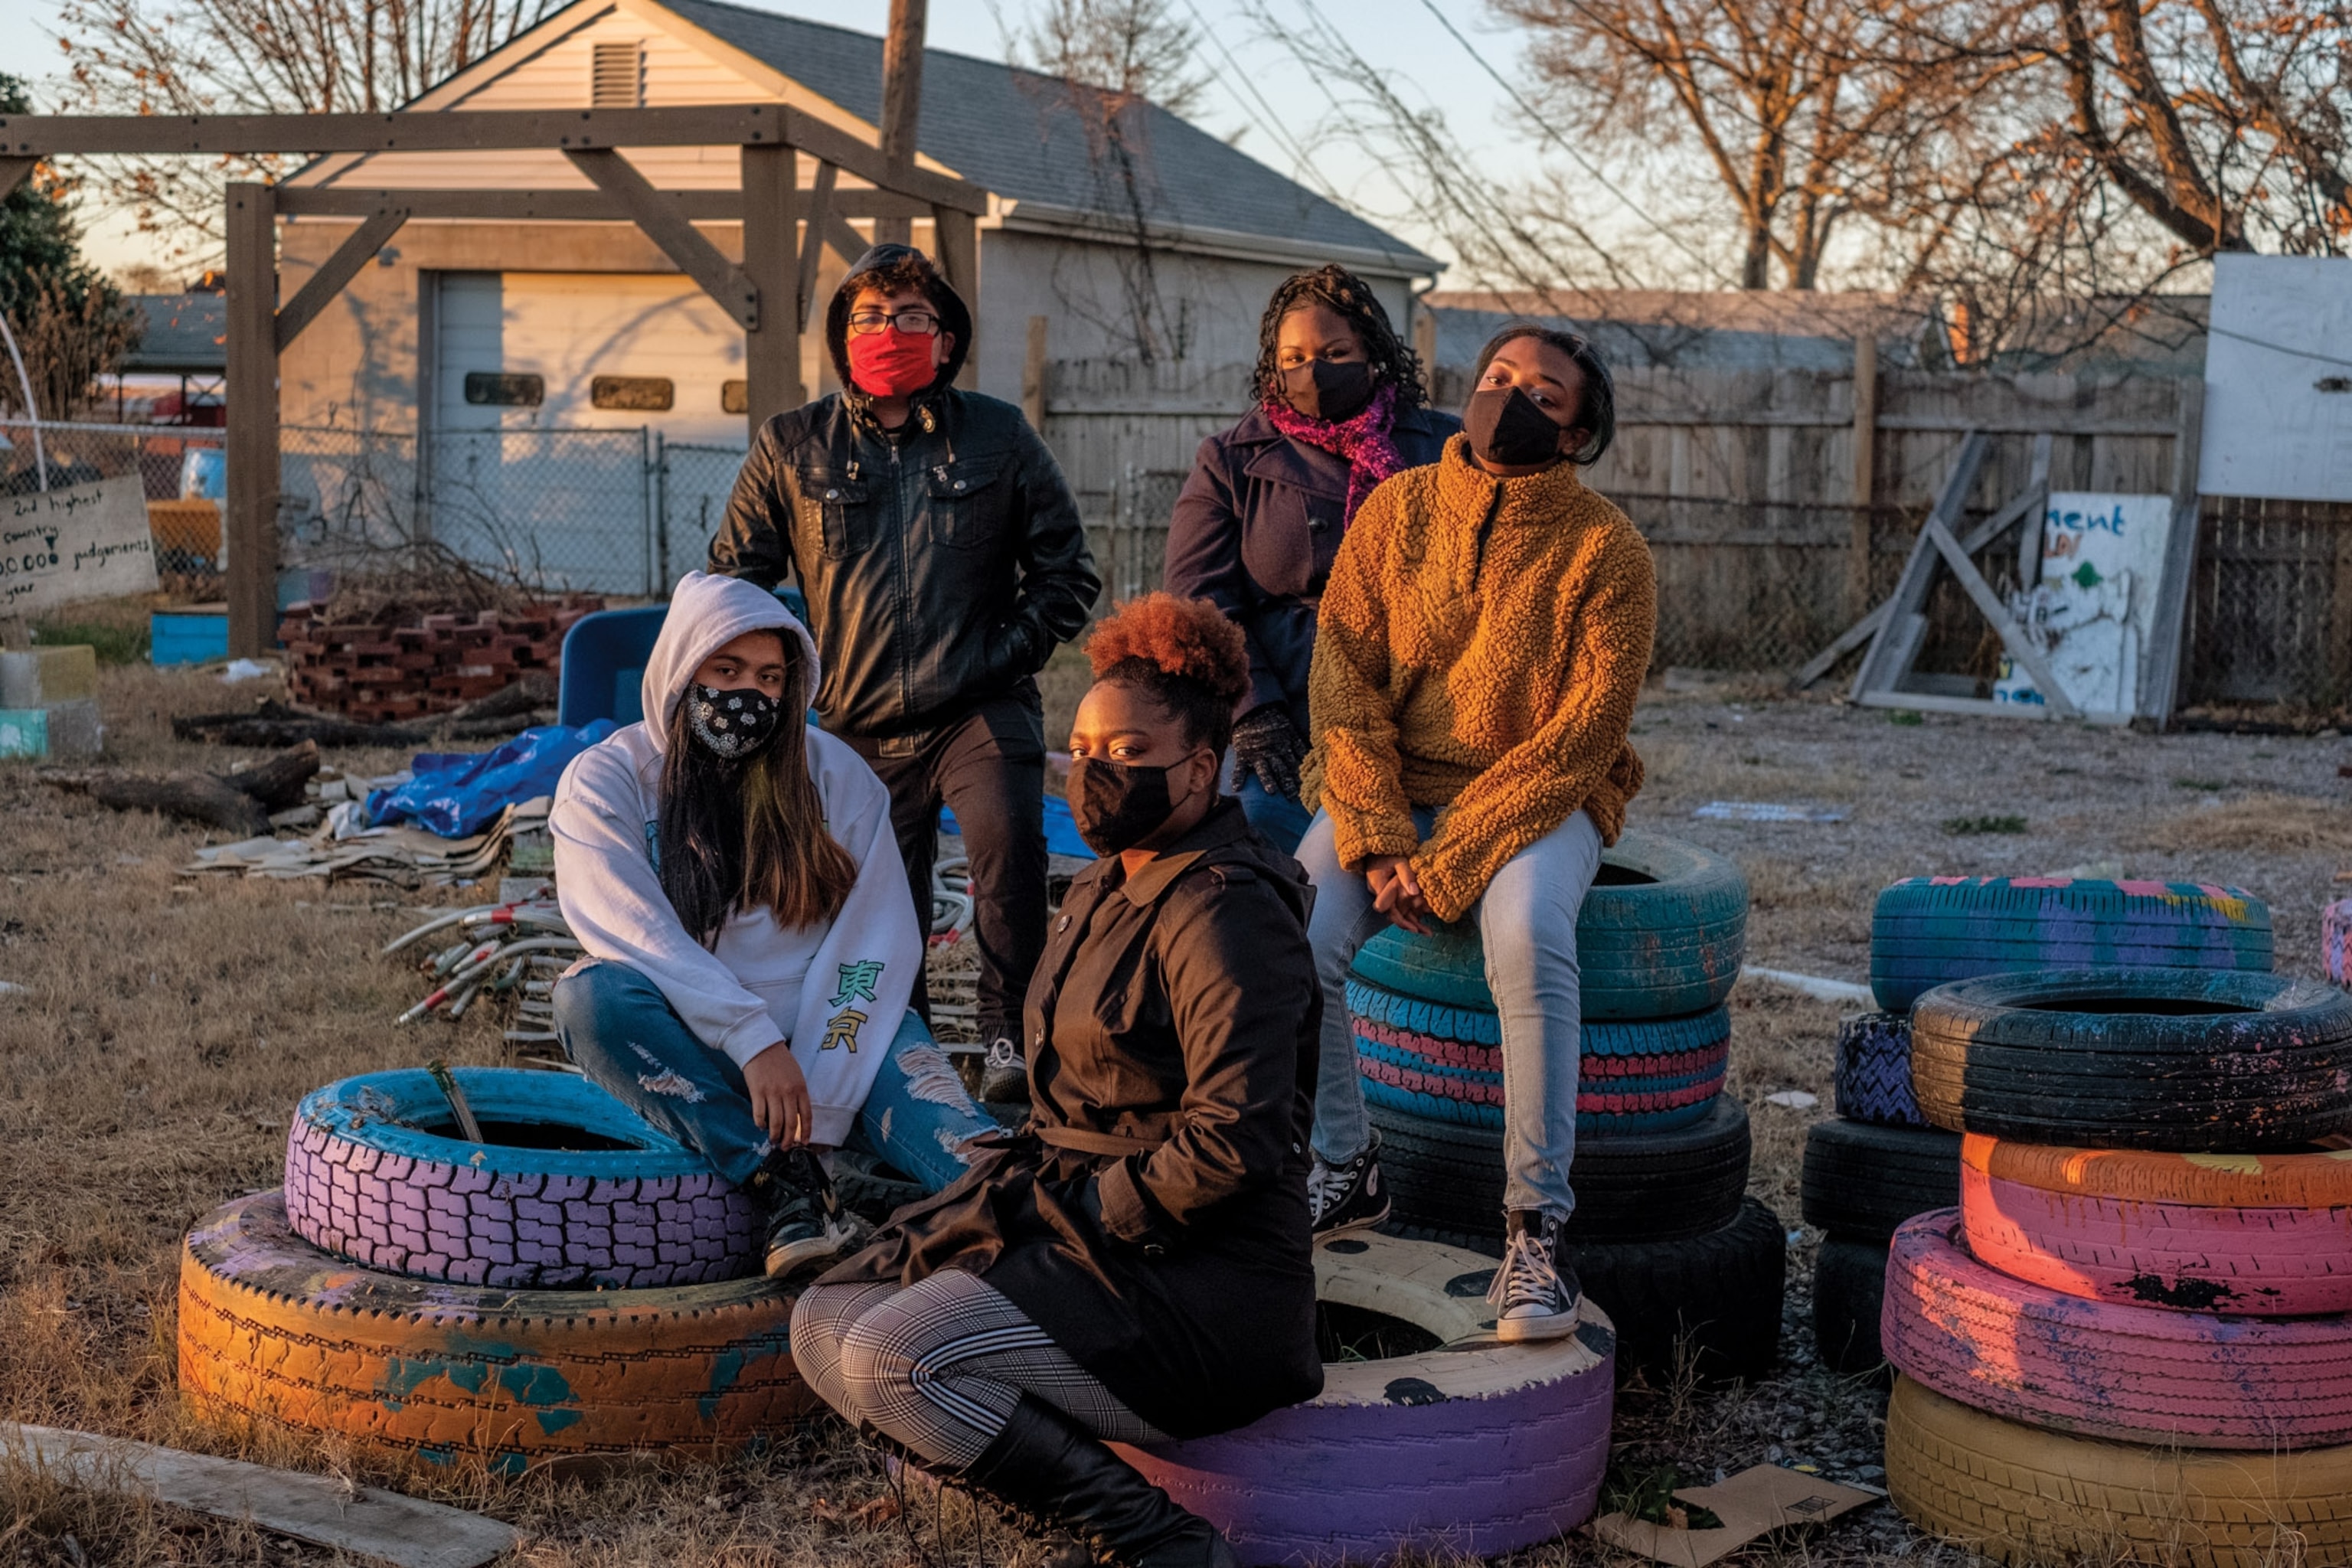 A group of youth sit on tires with natural light and face masks.